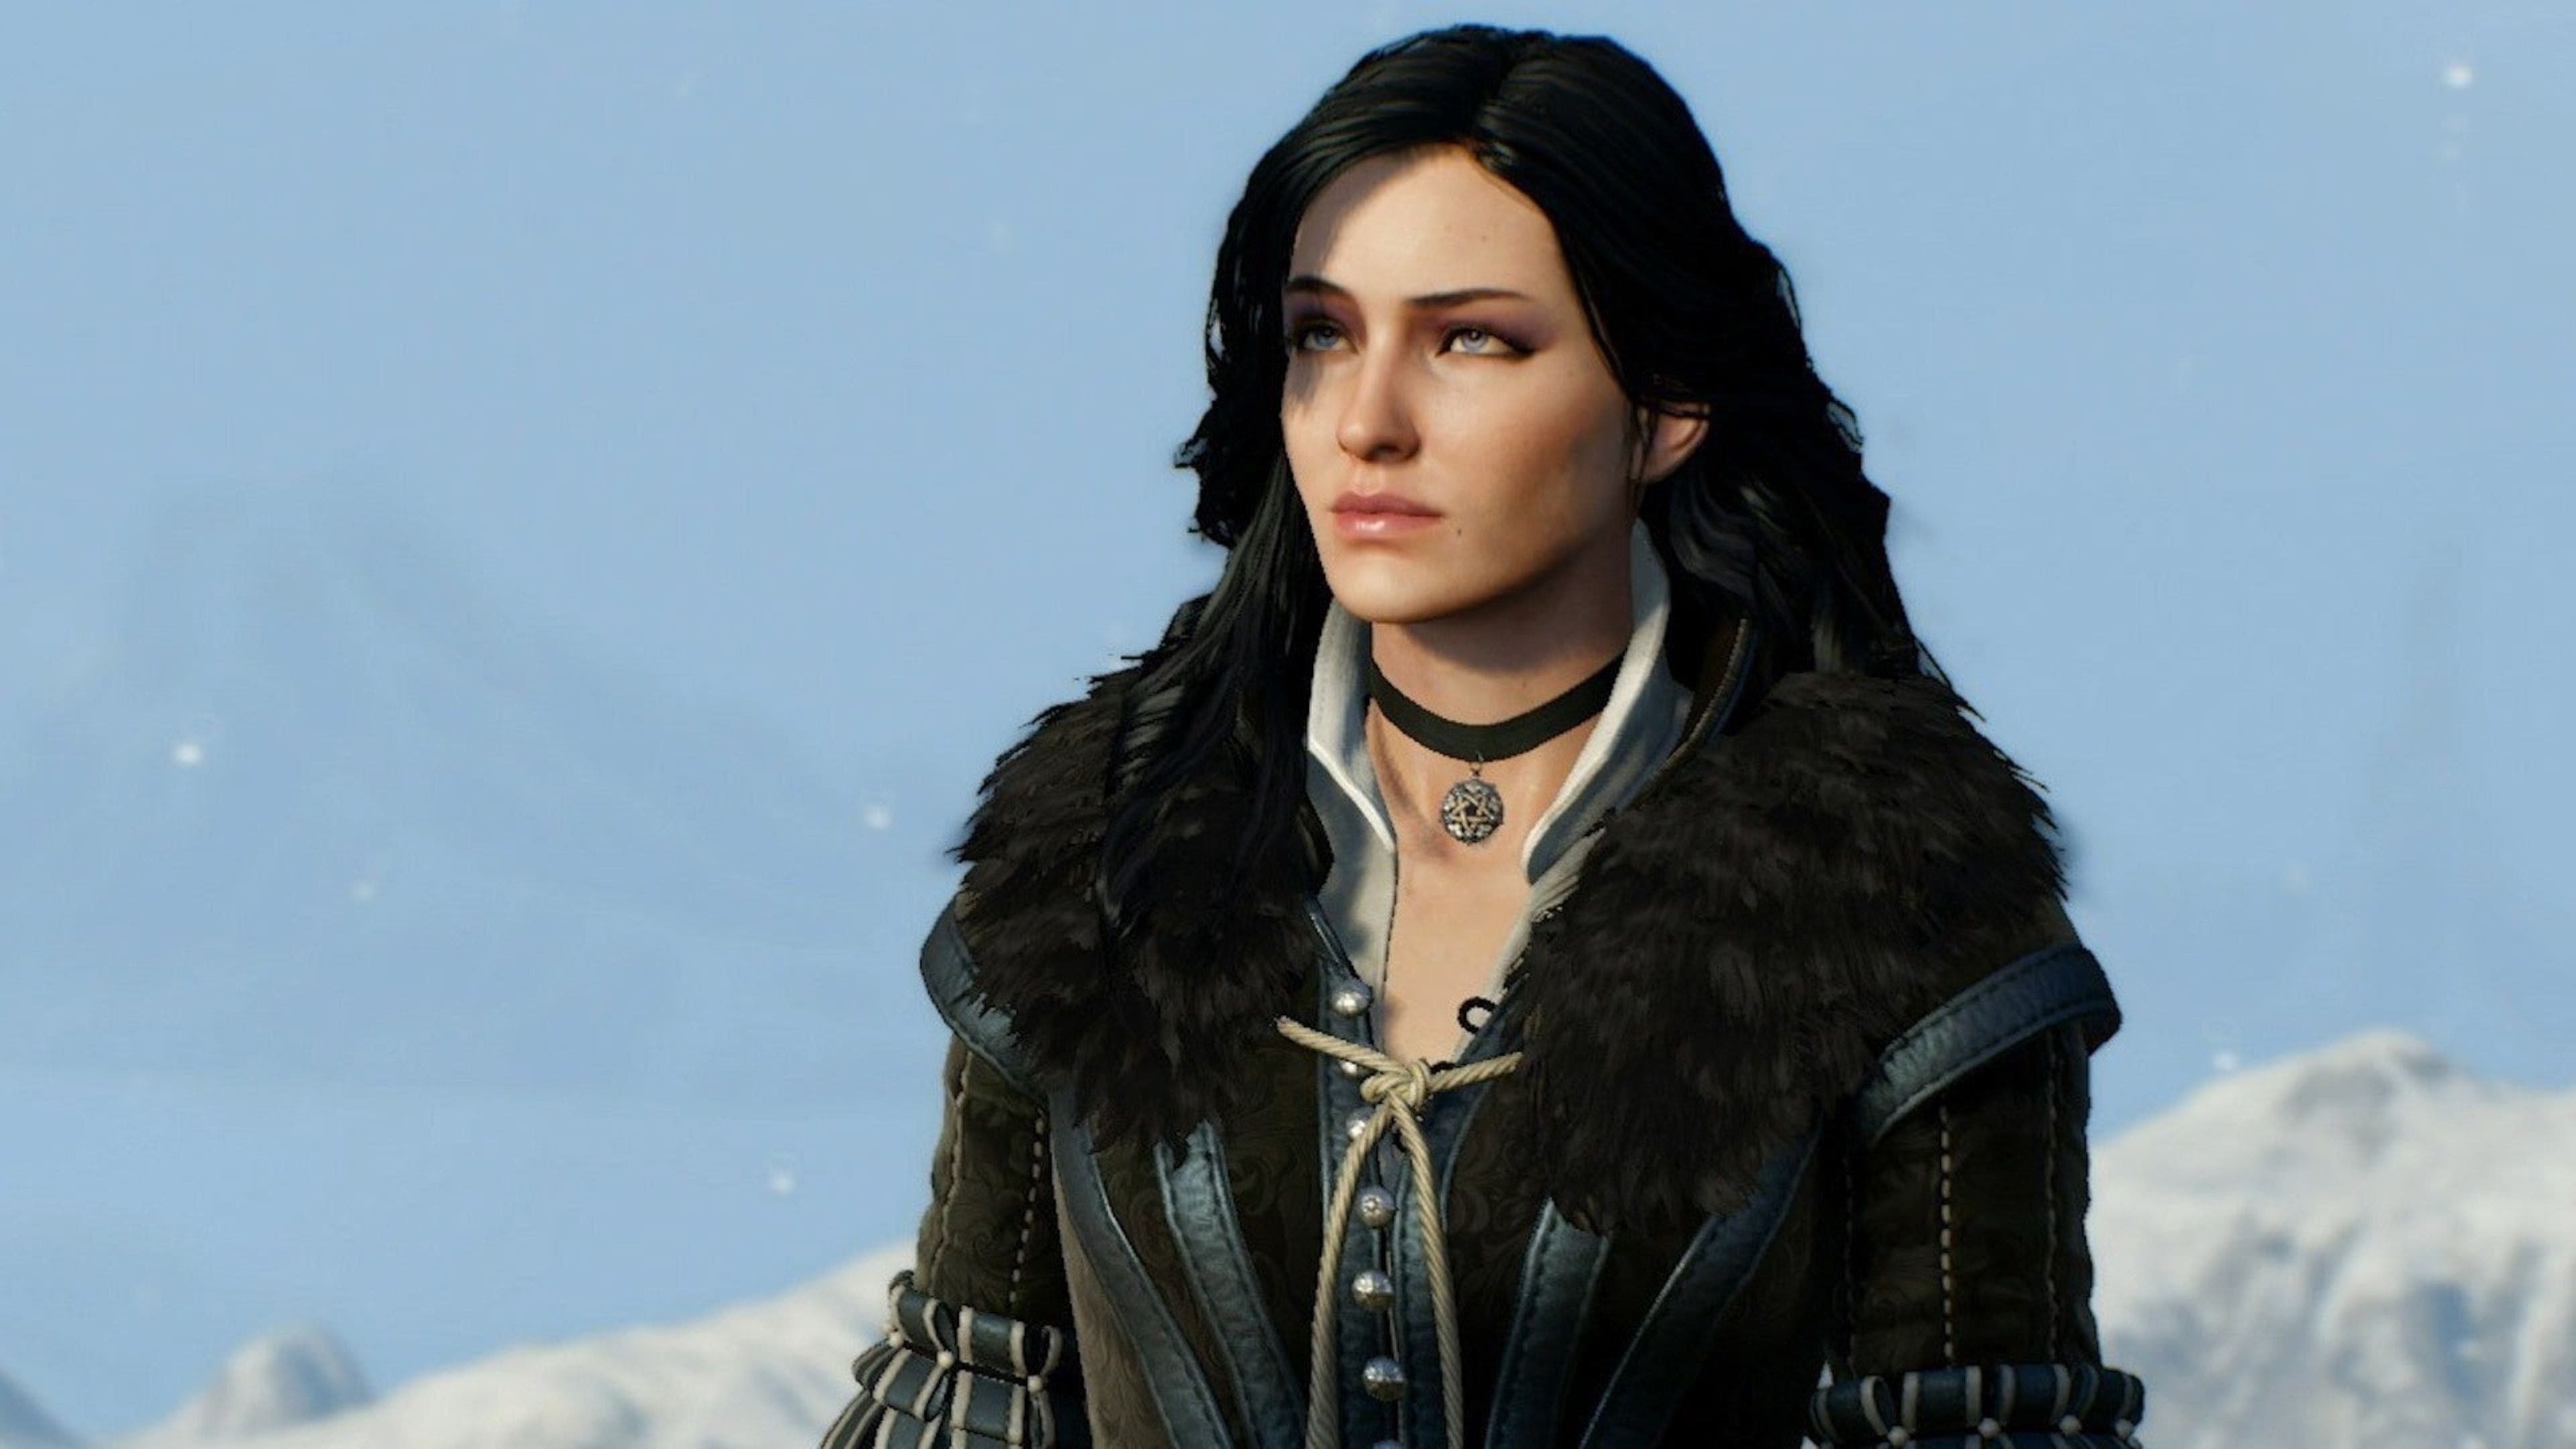 The price of the figure of Yennefer from The Witcher leaves fans frozen ...